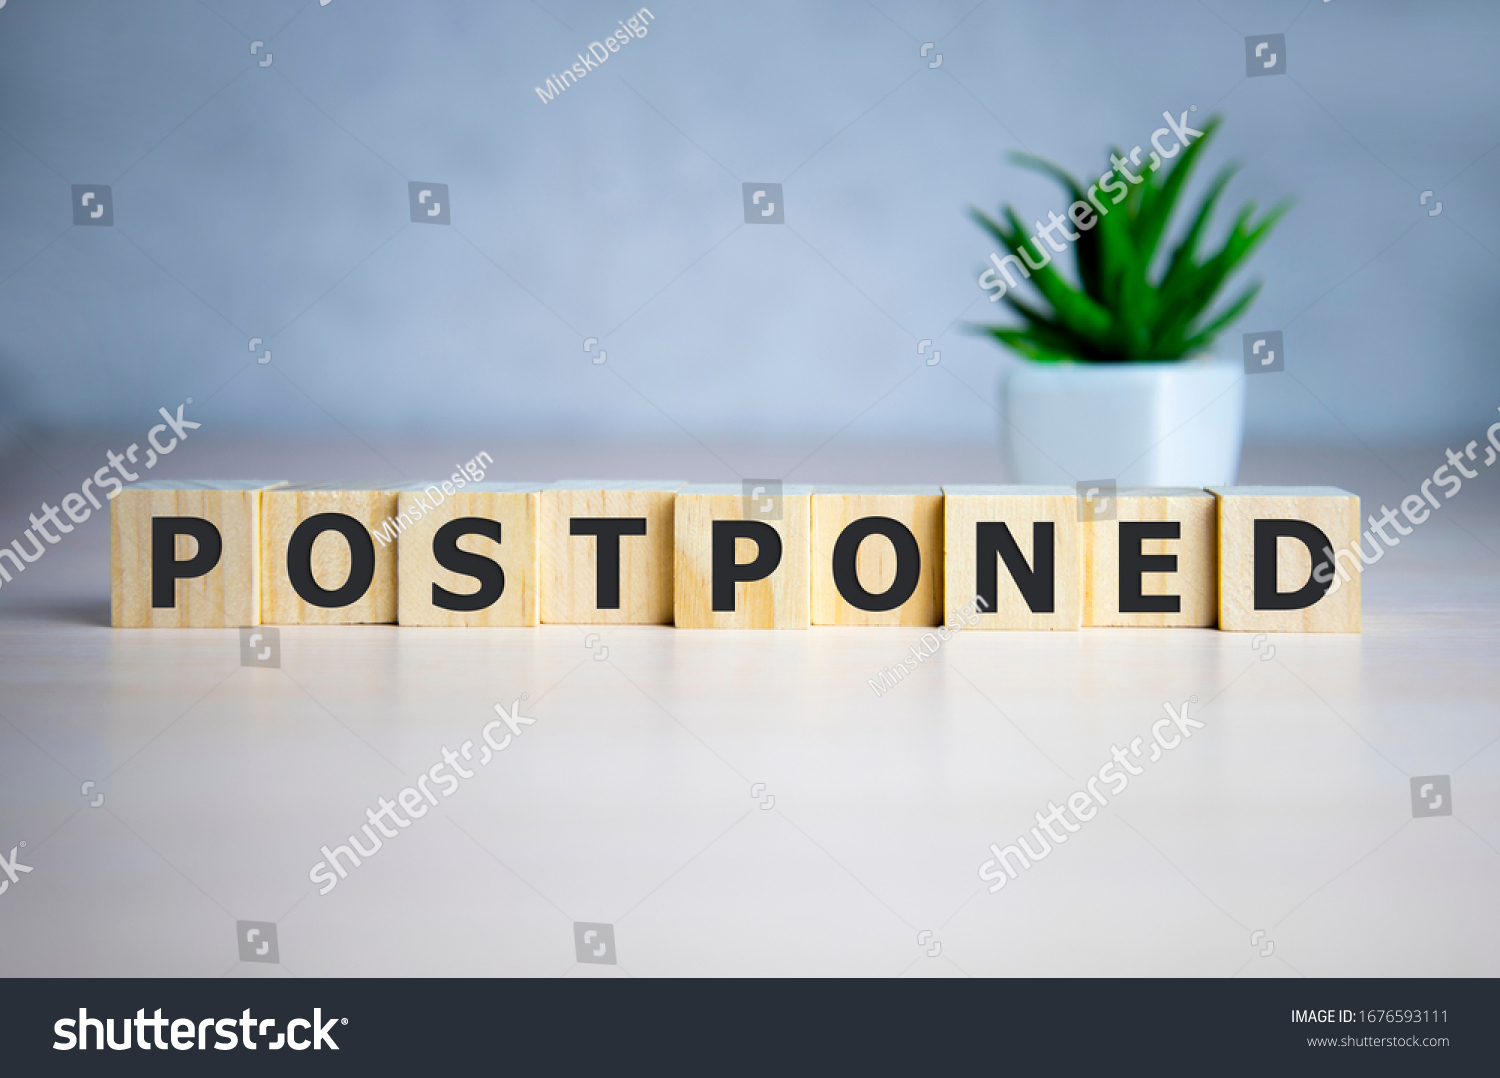 Postponed - words from wooden blocks with letters, postponed concept, top view background #1676593111